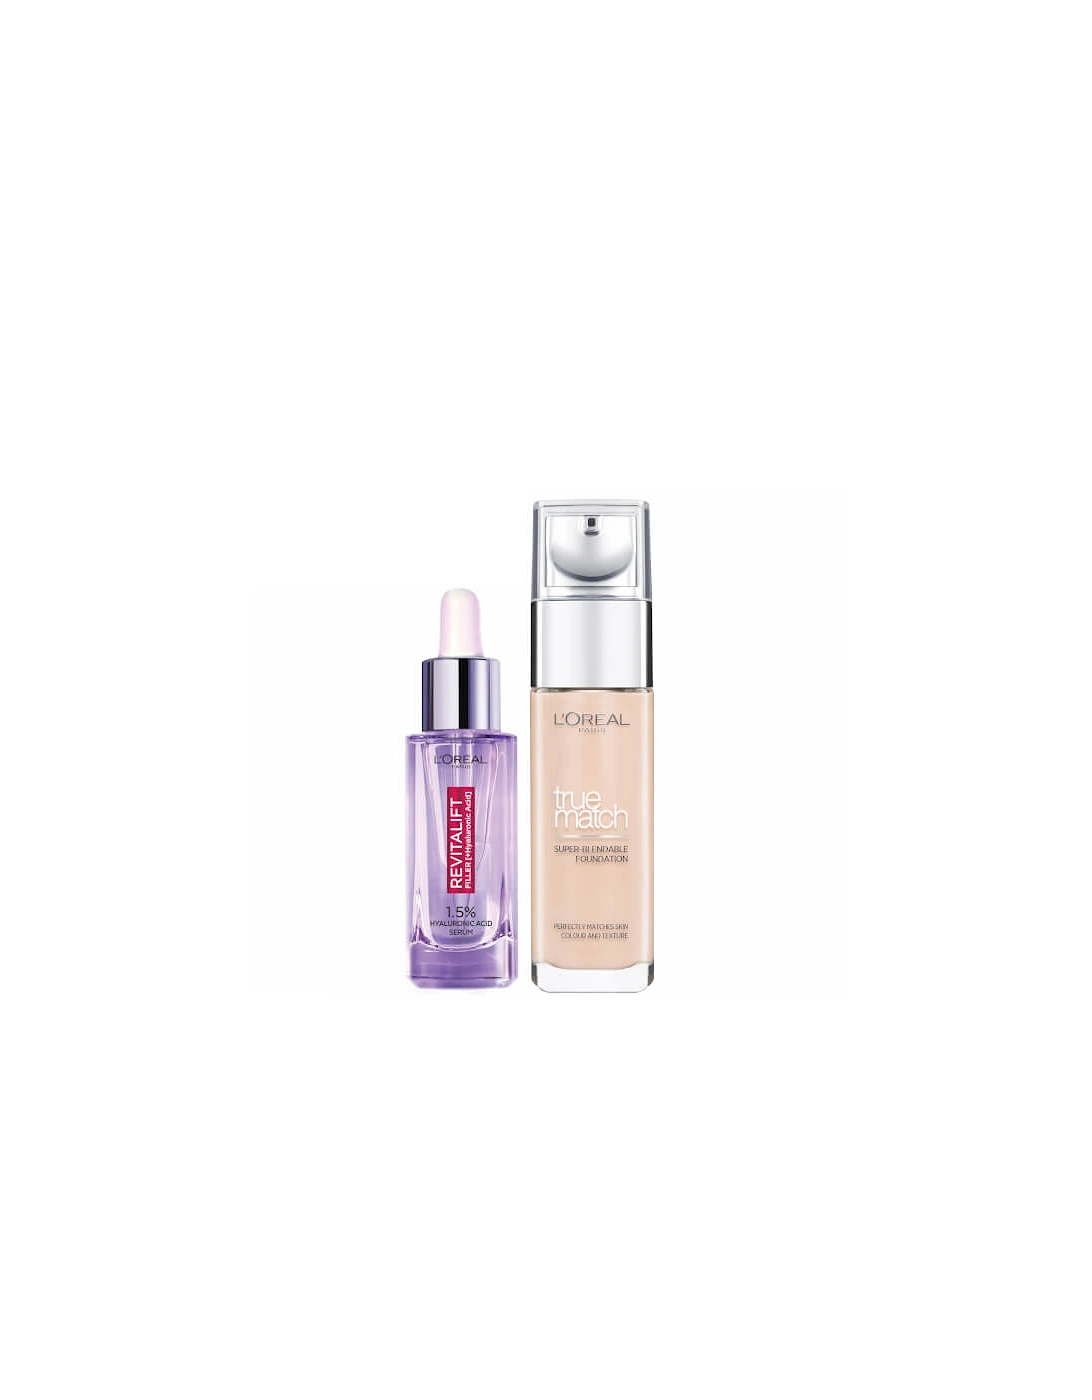 L’Oreal Paris Hyaluronic Acid Filler Serum and True Match Hyaluronic Acid Foundation Duo - 2N Vanilla, 2 of 1